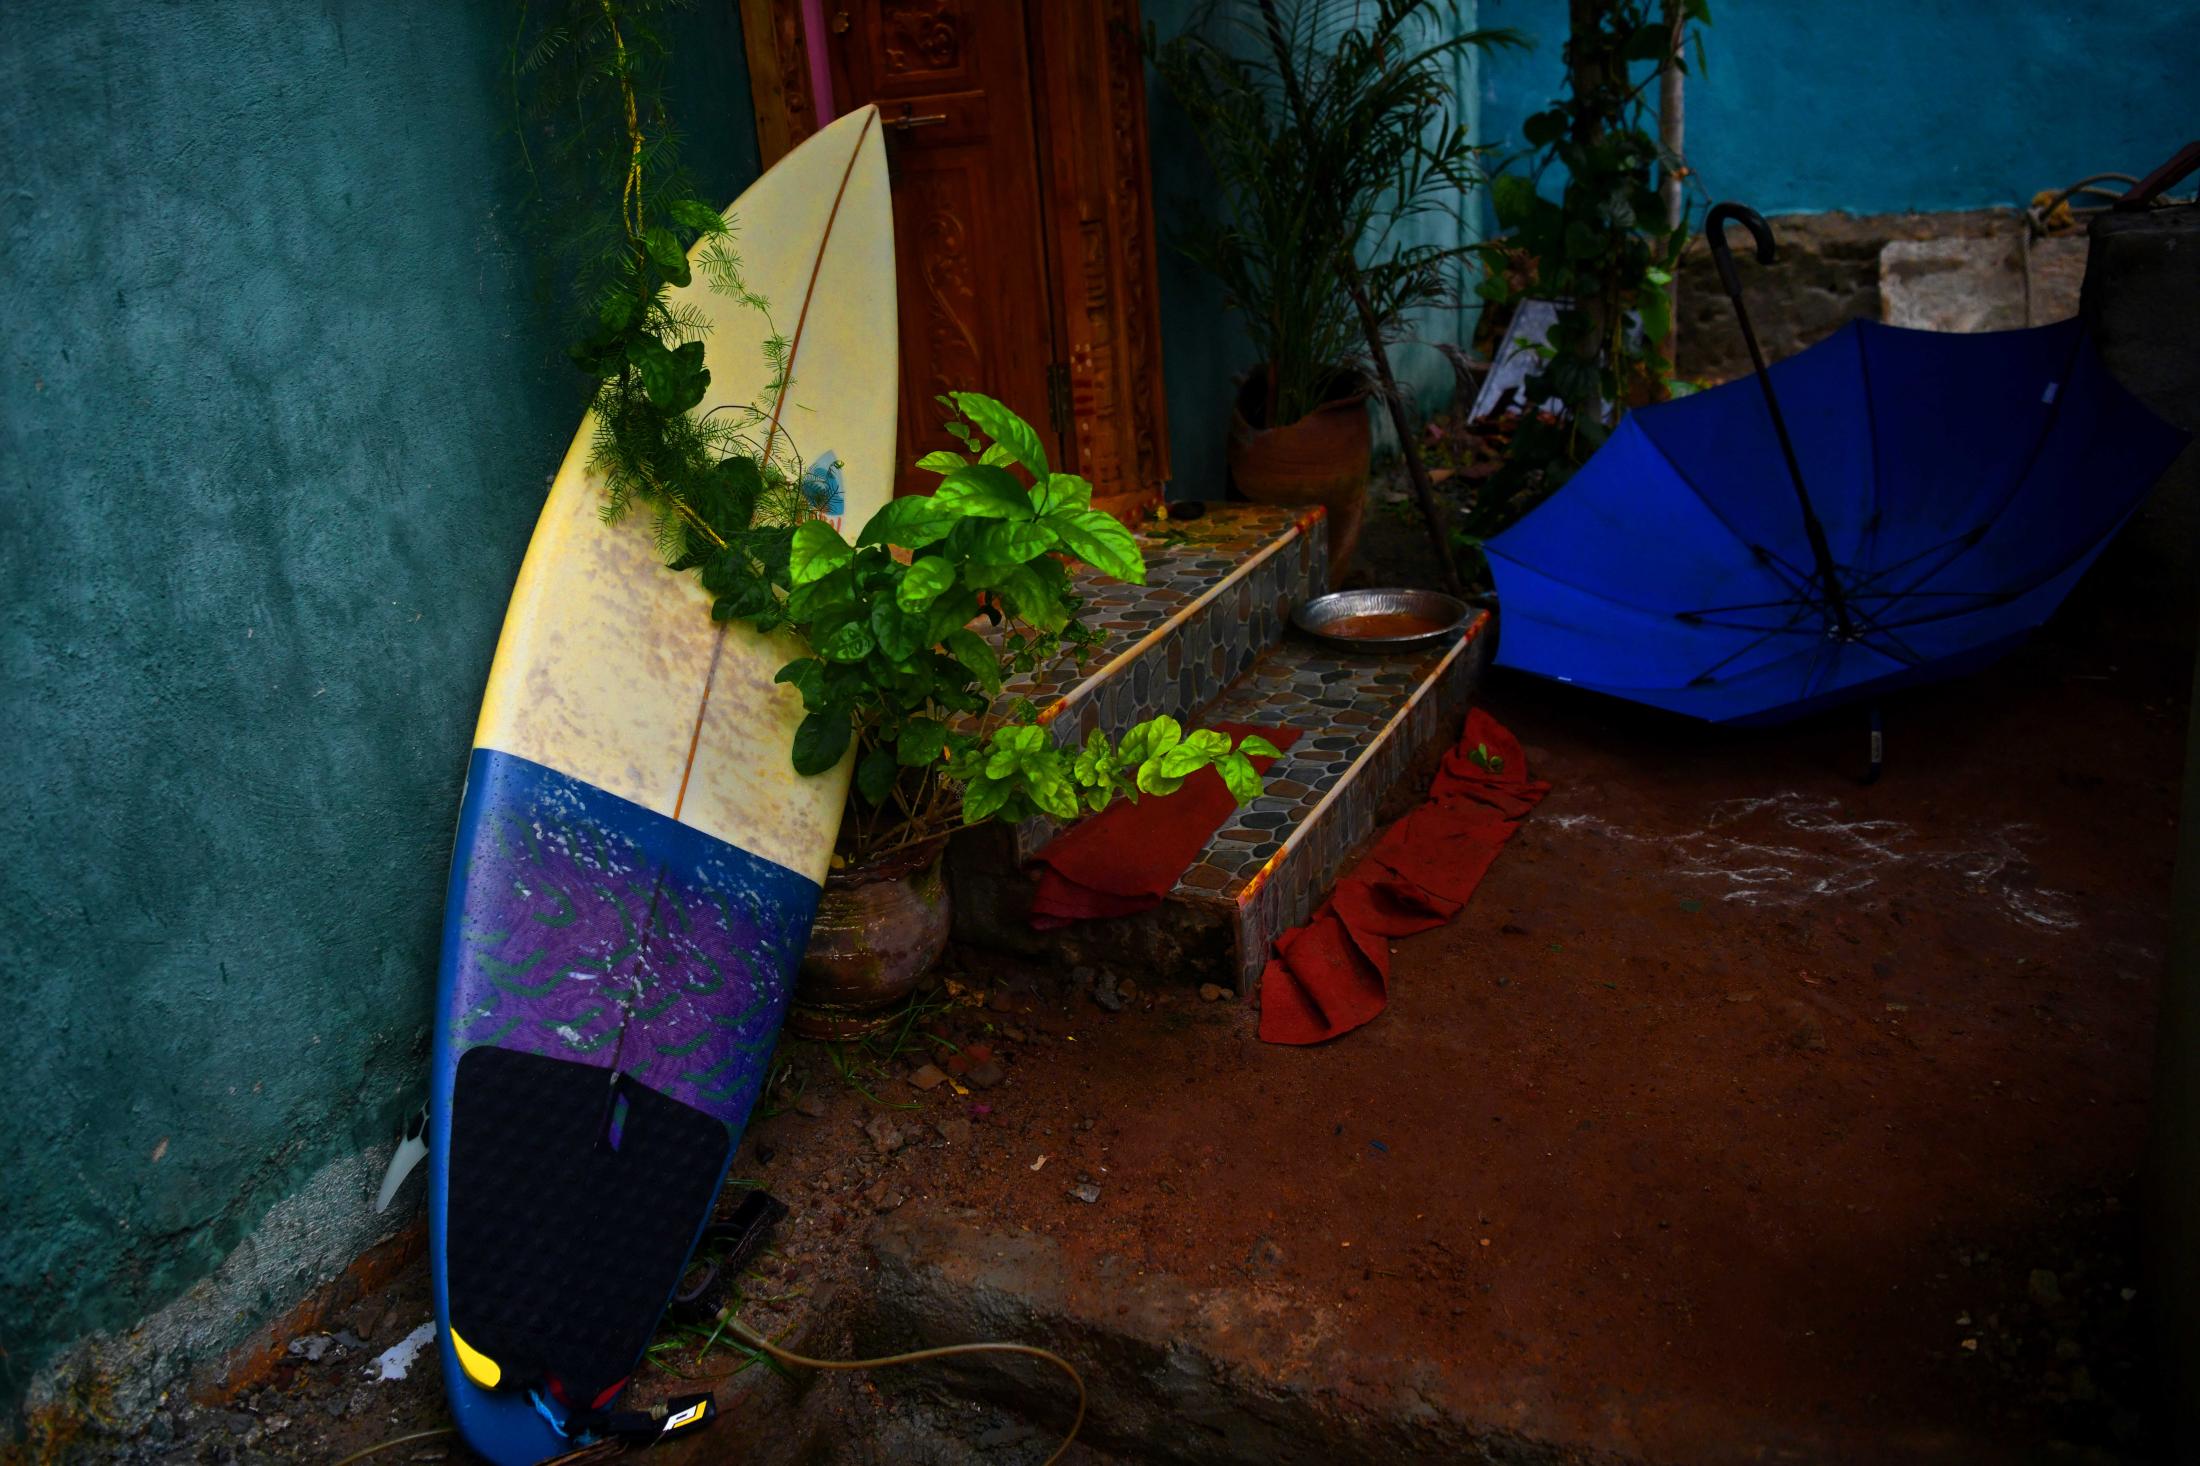 A very common sight in fisherman&rsquo;s colony. Surf boards are found outside homes of surfers. The first-generation surfers along the coast of Tamil Nadu are Mukesh Panjanathan known as Mumu, Velu, Santosh, Murthy and Shankar who learnt surfing by watching foreigners and passed on the knowledge to the younger generations. While they wanted to surf, they had no access to equipment. Mumu said &ndash; &ldquo;All the children who surf here are from fishing communities and the sea is their playground&rdquo;. All of them accompany their parents in the morning to fish in wooden boats and when the boat is pulled apart to dry, Mumu along with his friends took a plank and skid into the sea on their belly&rsquo;s. These planks are similar to boogie (body) boards. Mumu (36) dropped out of school and did odd jobs such as working in restaurants, cleaning homes, toilets and more. He hated his life and decided to pursue surfing seriously but no one gave him a board. He said &ndash; &ldquo;I approached foreigners who came here to surf and most of them said no. It&rsquo;s only after I got my first board did, I realise why. They are not only expensive but delicate. If anything happened to a board fixing it would be an impossible task as you did not get raw materials in India then.&rdquo; Two foreigners left their boards behind and one of his friends who took them used to give them on hire. However, it wasn&rsquo;t easy to afford one and he used to buy him a drink in return. A Japanese surfer wanted to sell his board before leaving and when Mumu asked him for it, he said &ndash; &ldquo;I am not giving it away, I am selling it.&rdquo; He managed to gather Rs.1,500 by borrowing from friends and family and told the Japanese surfer that this is all he has. The surfer then laughed and said &ndash; &ldquo;A leash costs that much but I will give this board to you for this price. I wanted you to earn the board and understand the value of it.&rdquo;